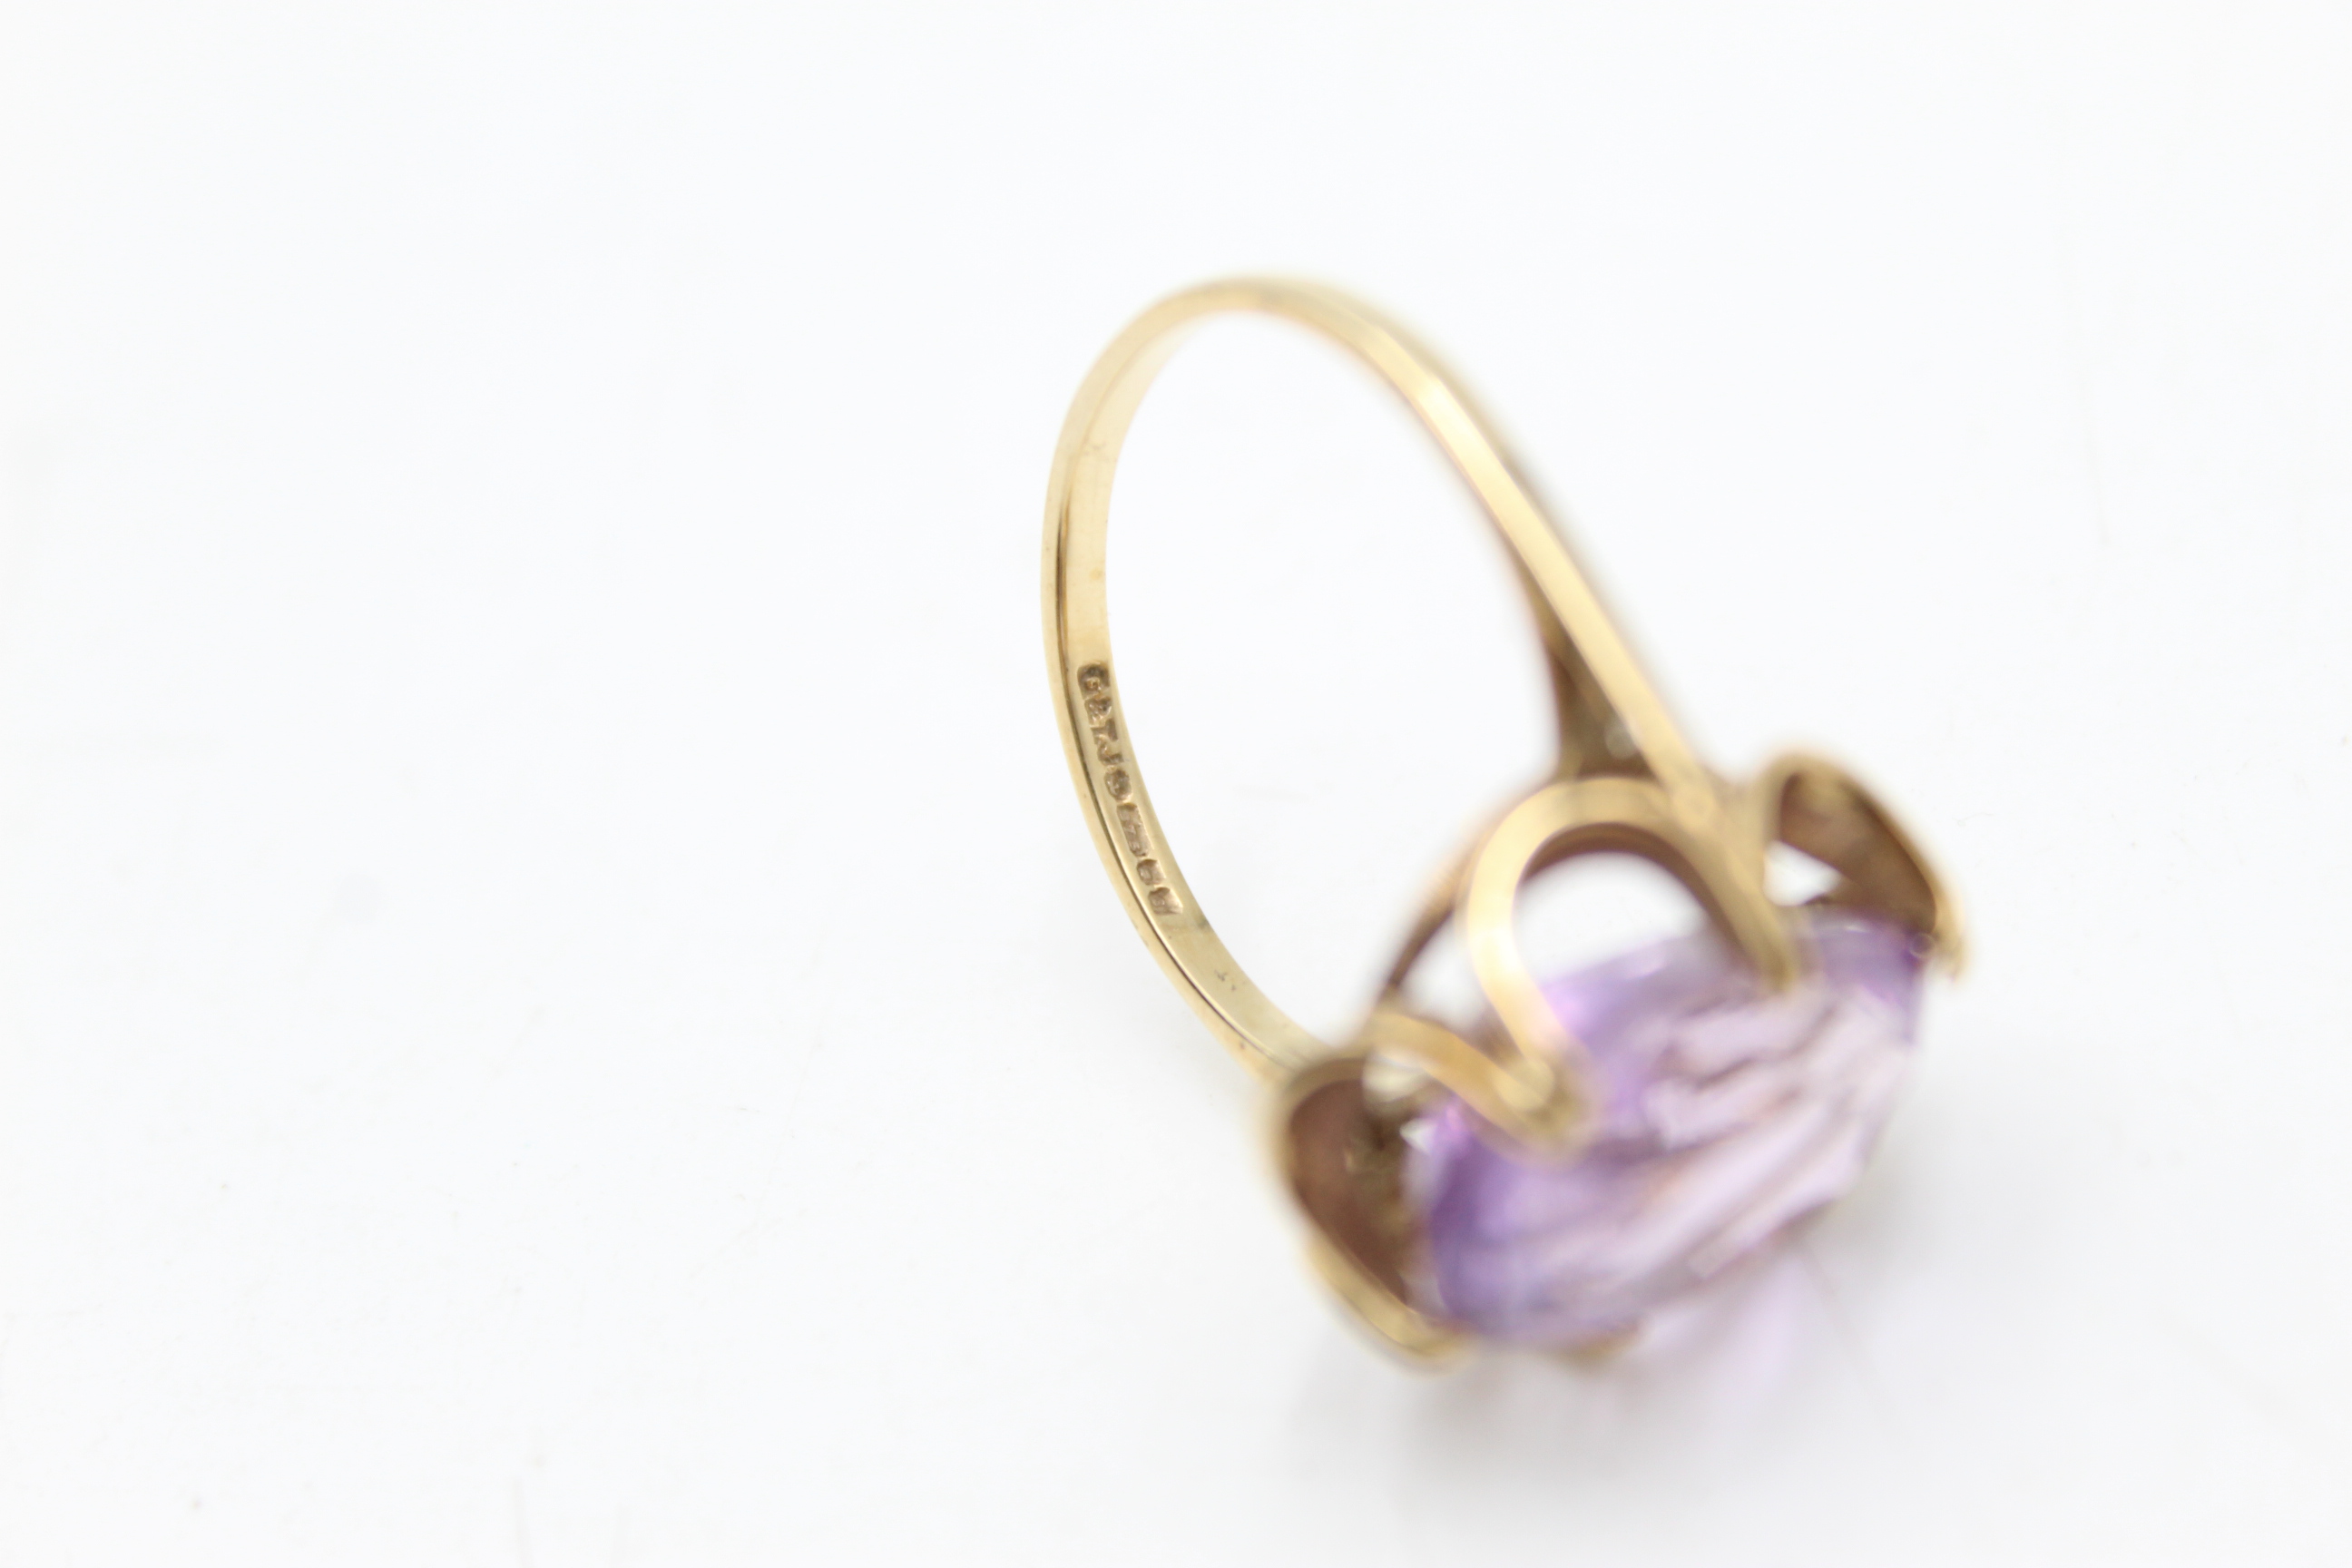 9ct gold amethyst dress ring (5.1g) - Image 6 of 7